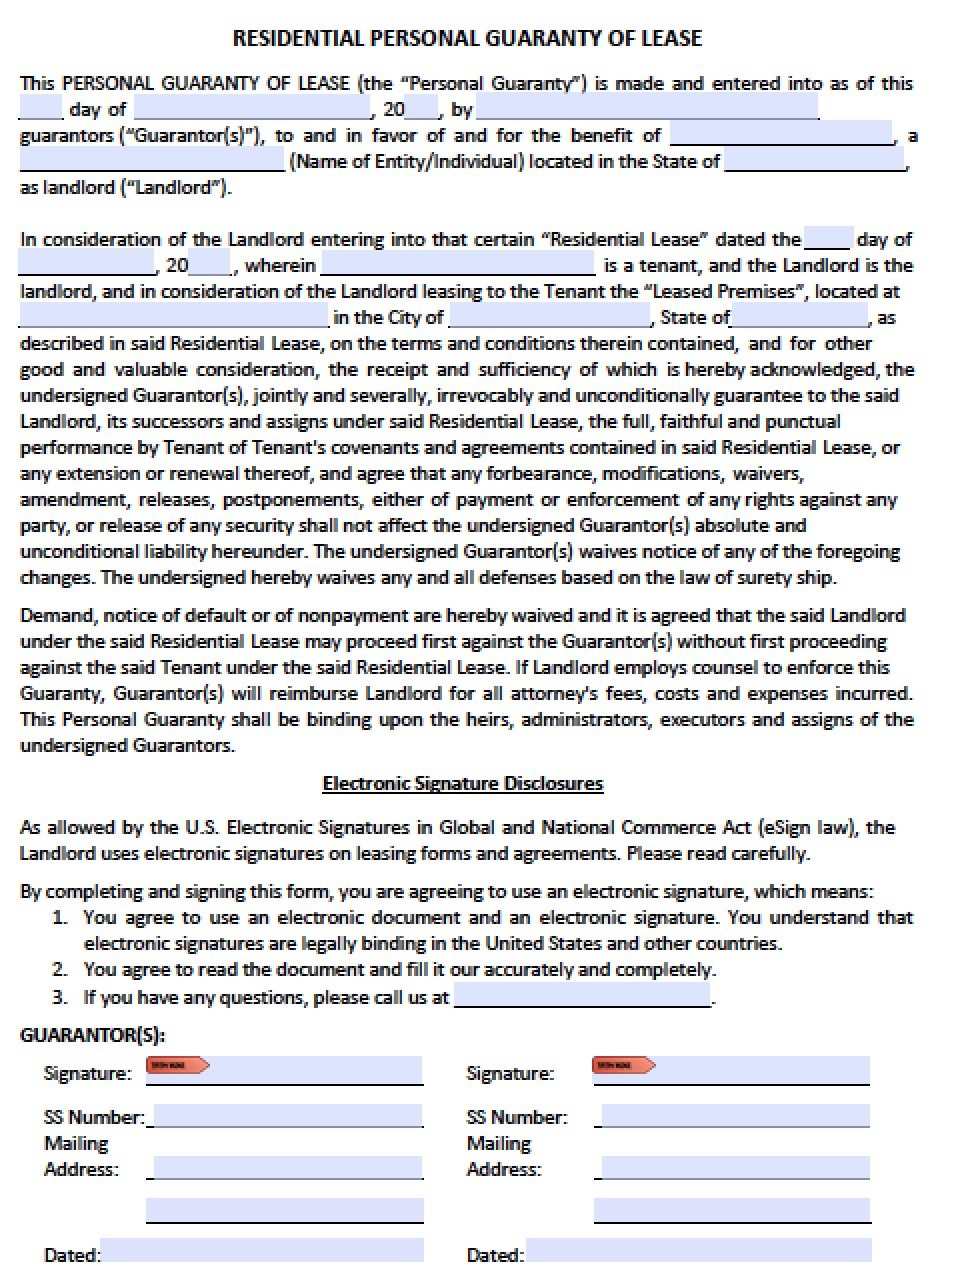 Guarantee Agreement Template Download Personal Guarantee Agreement Forms Leases Loan Pdf